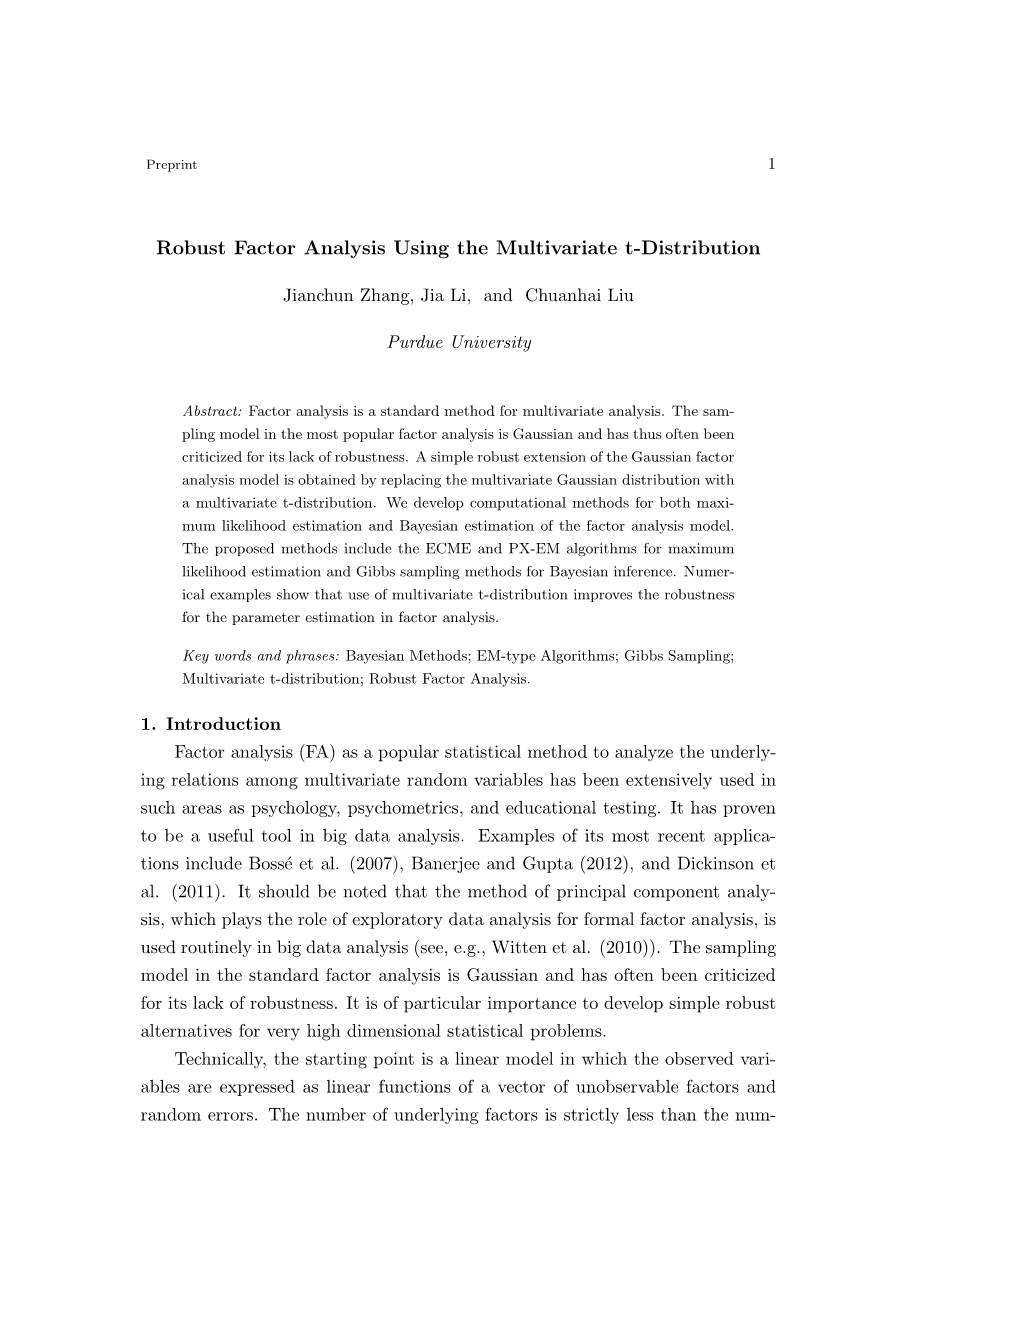 Robust Factor Analysis Using the Multivariate T-Distribution